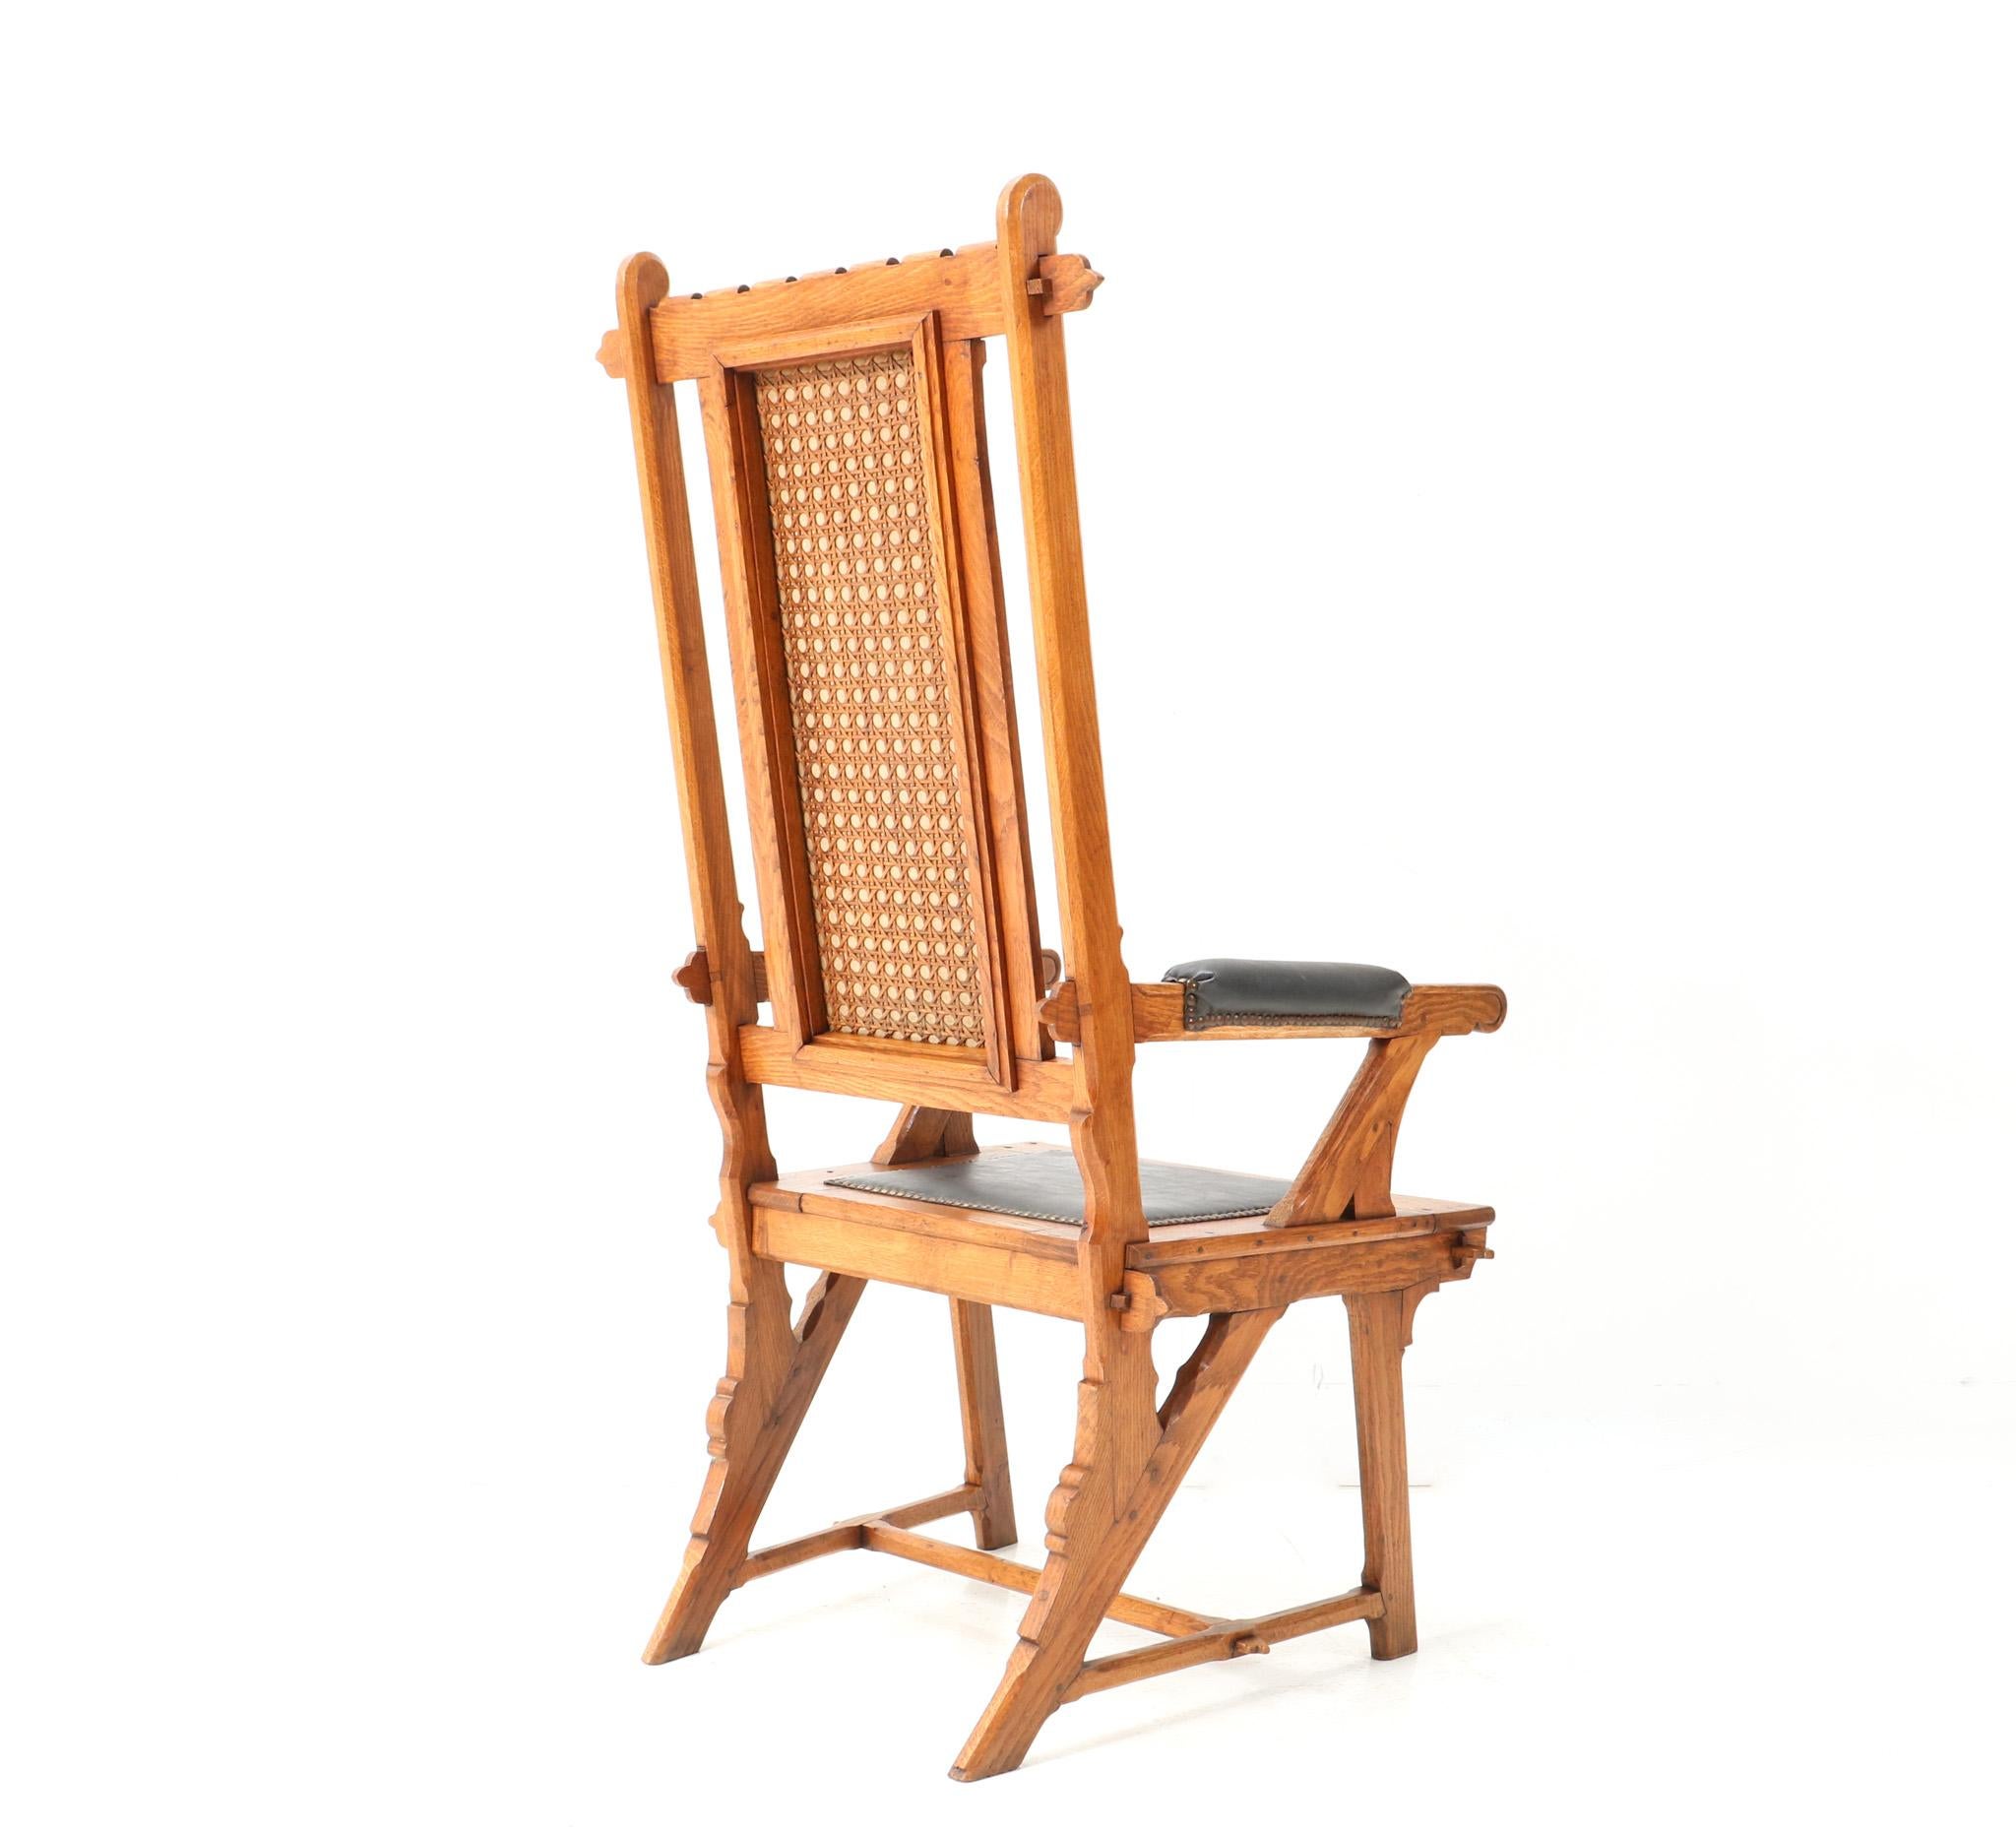 Early 20th Century Oak Arts & Crafts Art Nouveau High Back Armchair by H.P. Berlage, 1900s For Sale